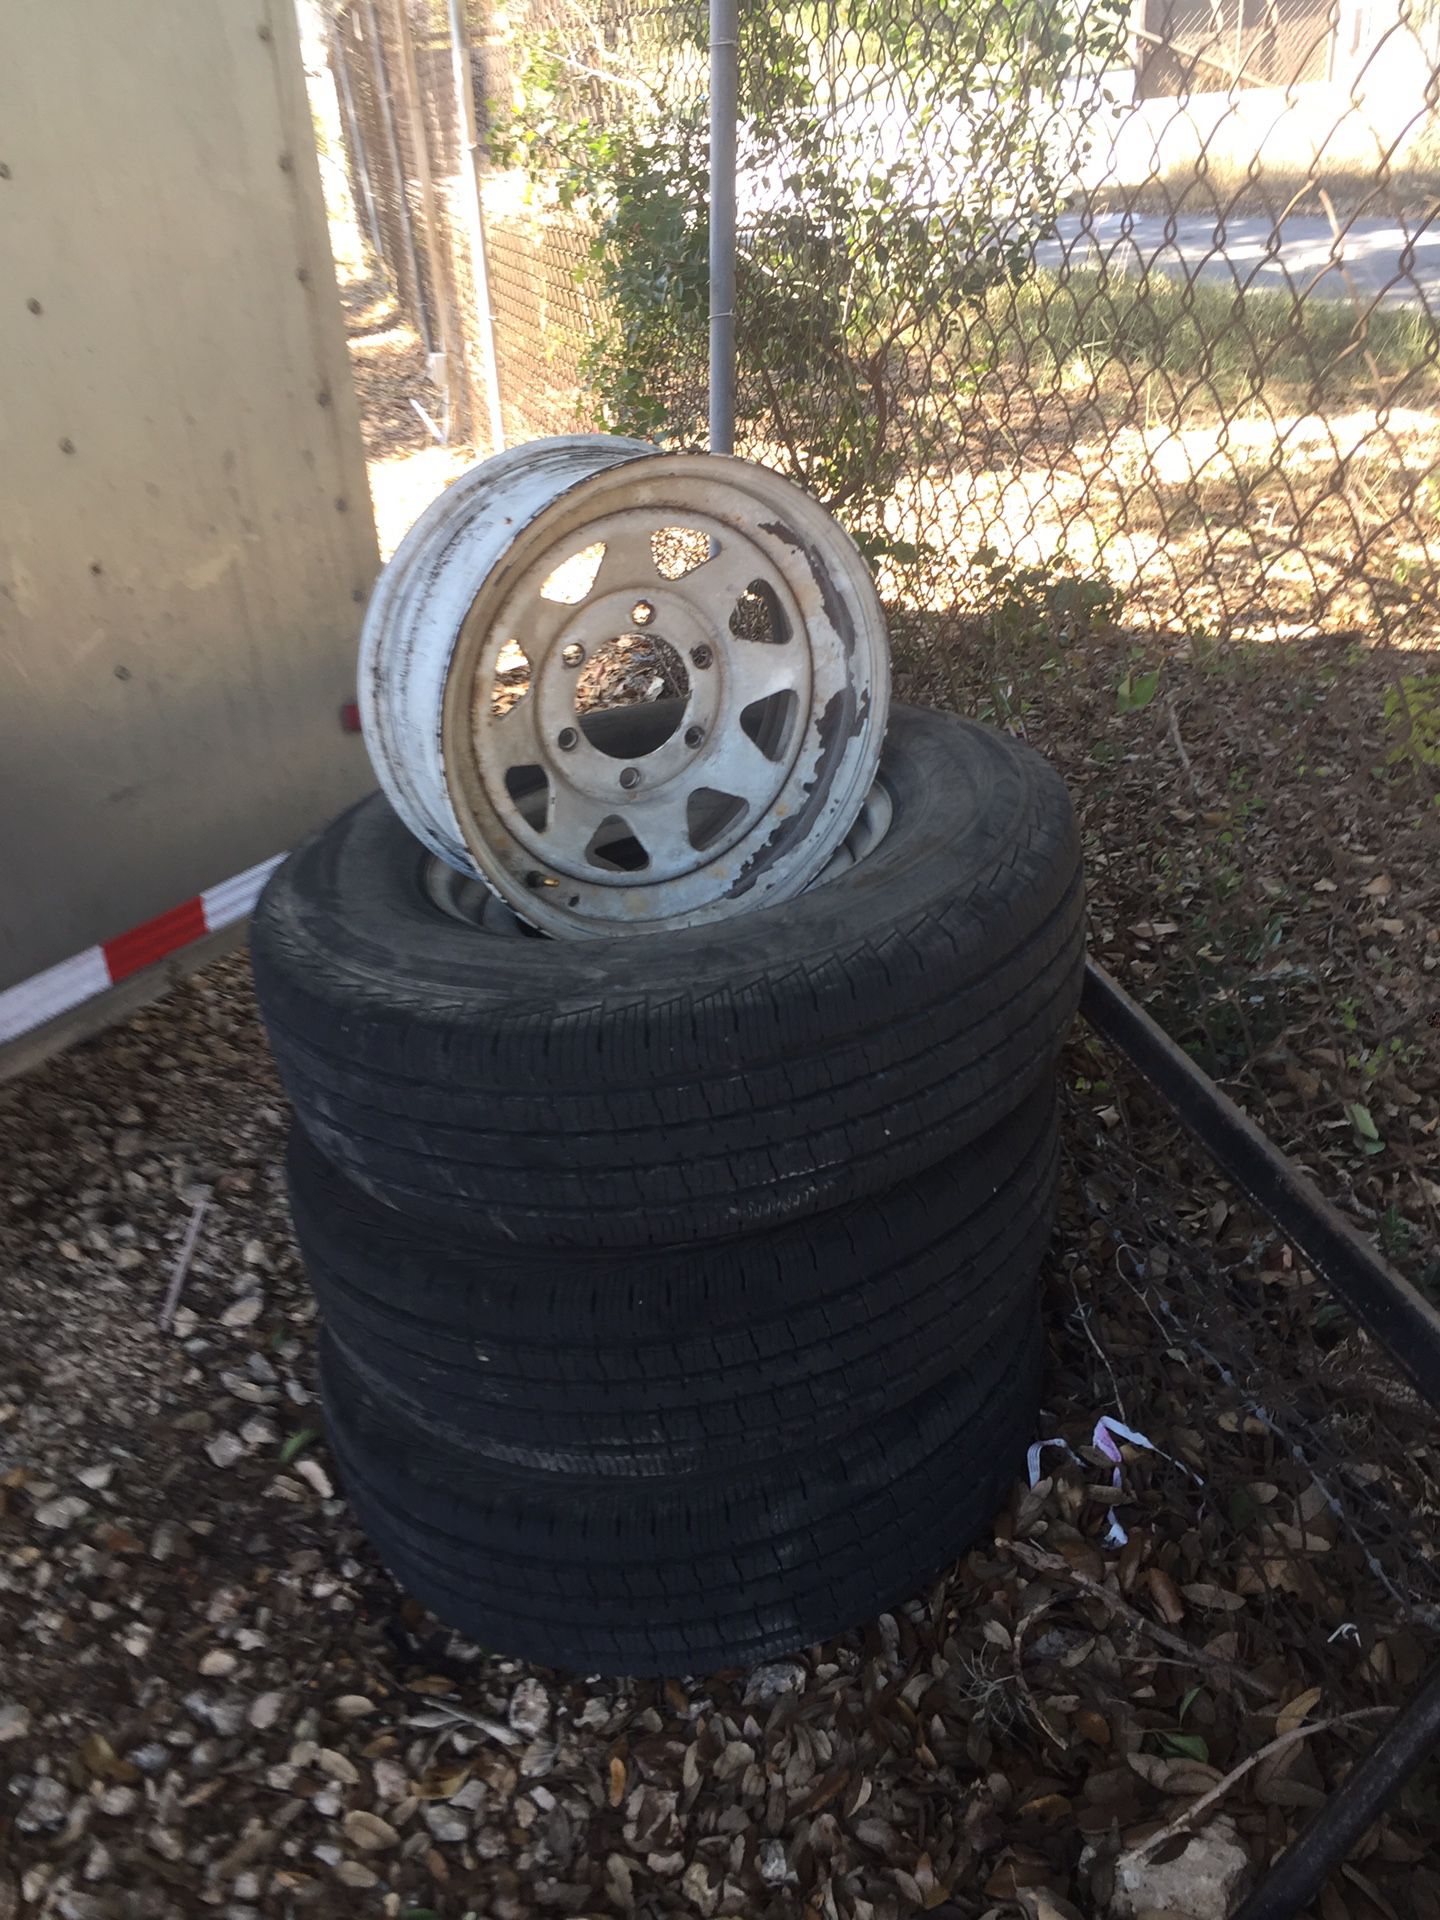 America’s trailer tire and rim set of 3 with one rim